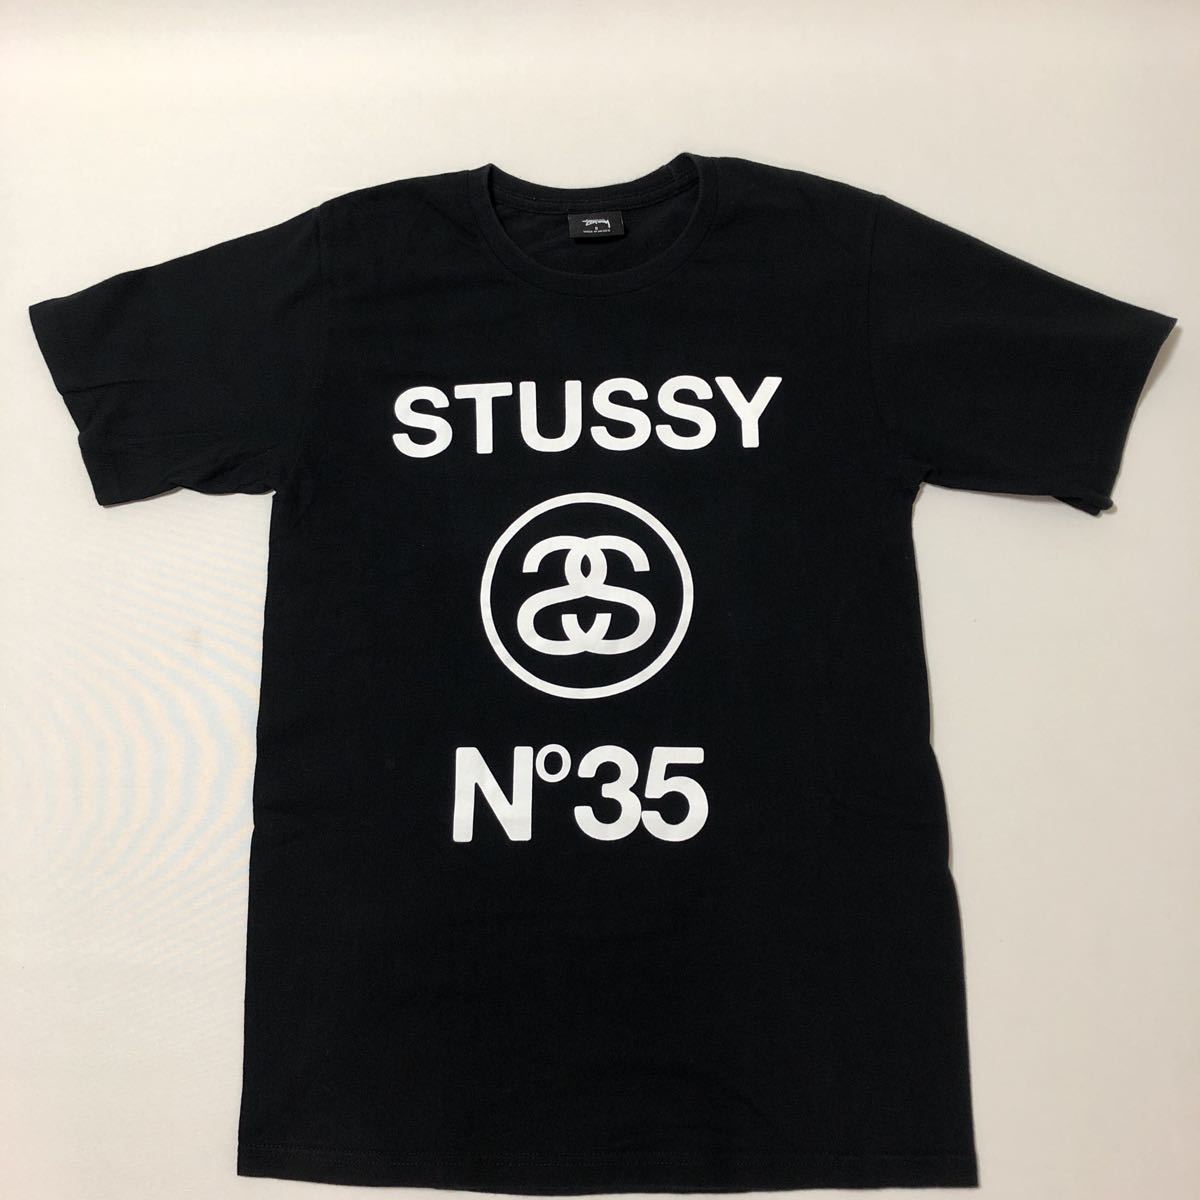 STUSSY fragment Tシャツ ( ステューシー レア old チャプト 記念 限定 総柄 フォト レア Tee )